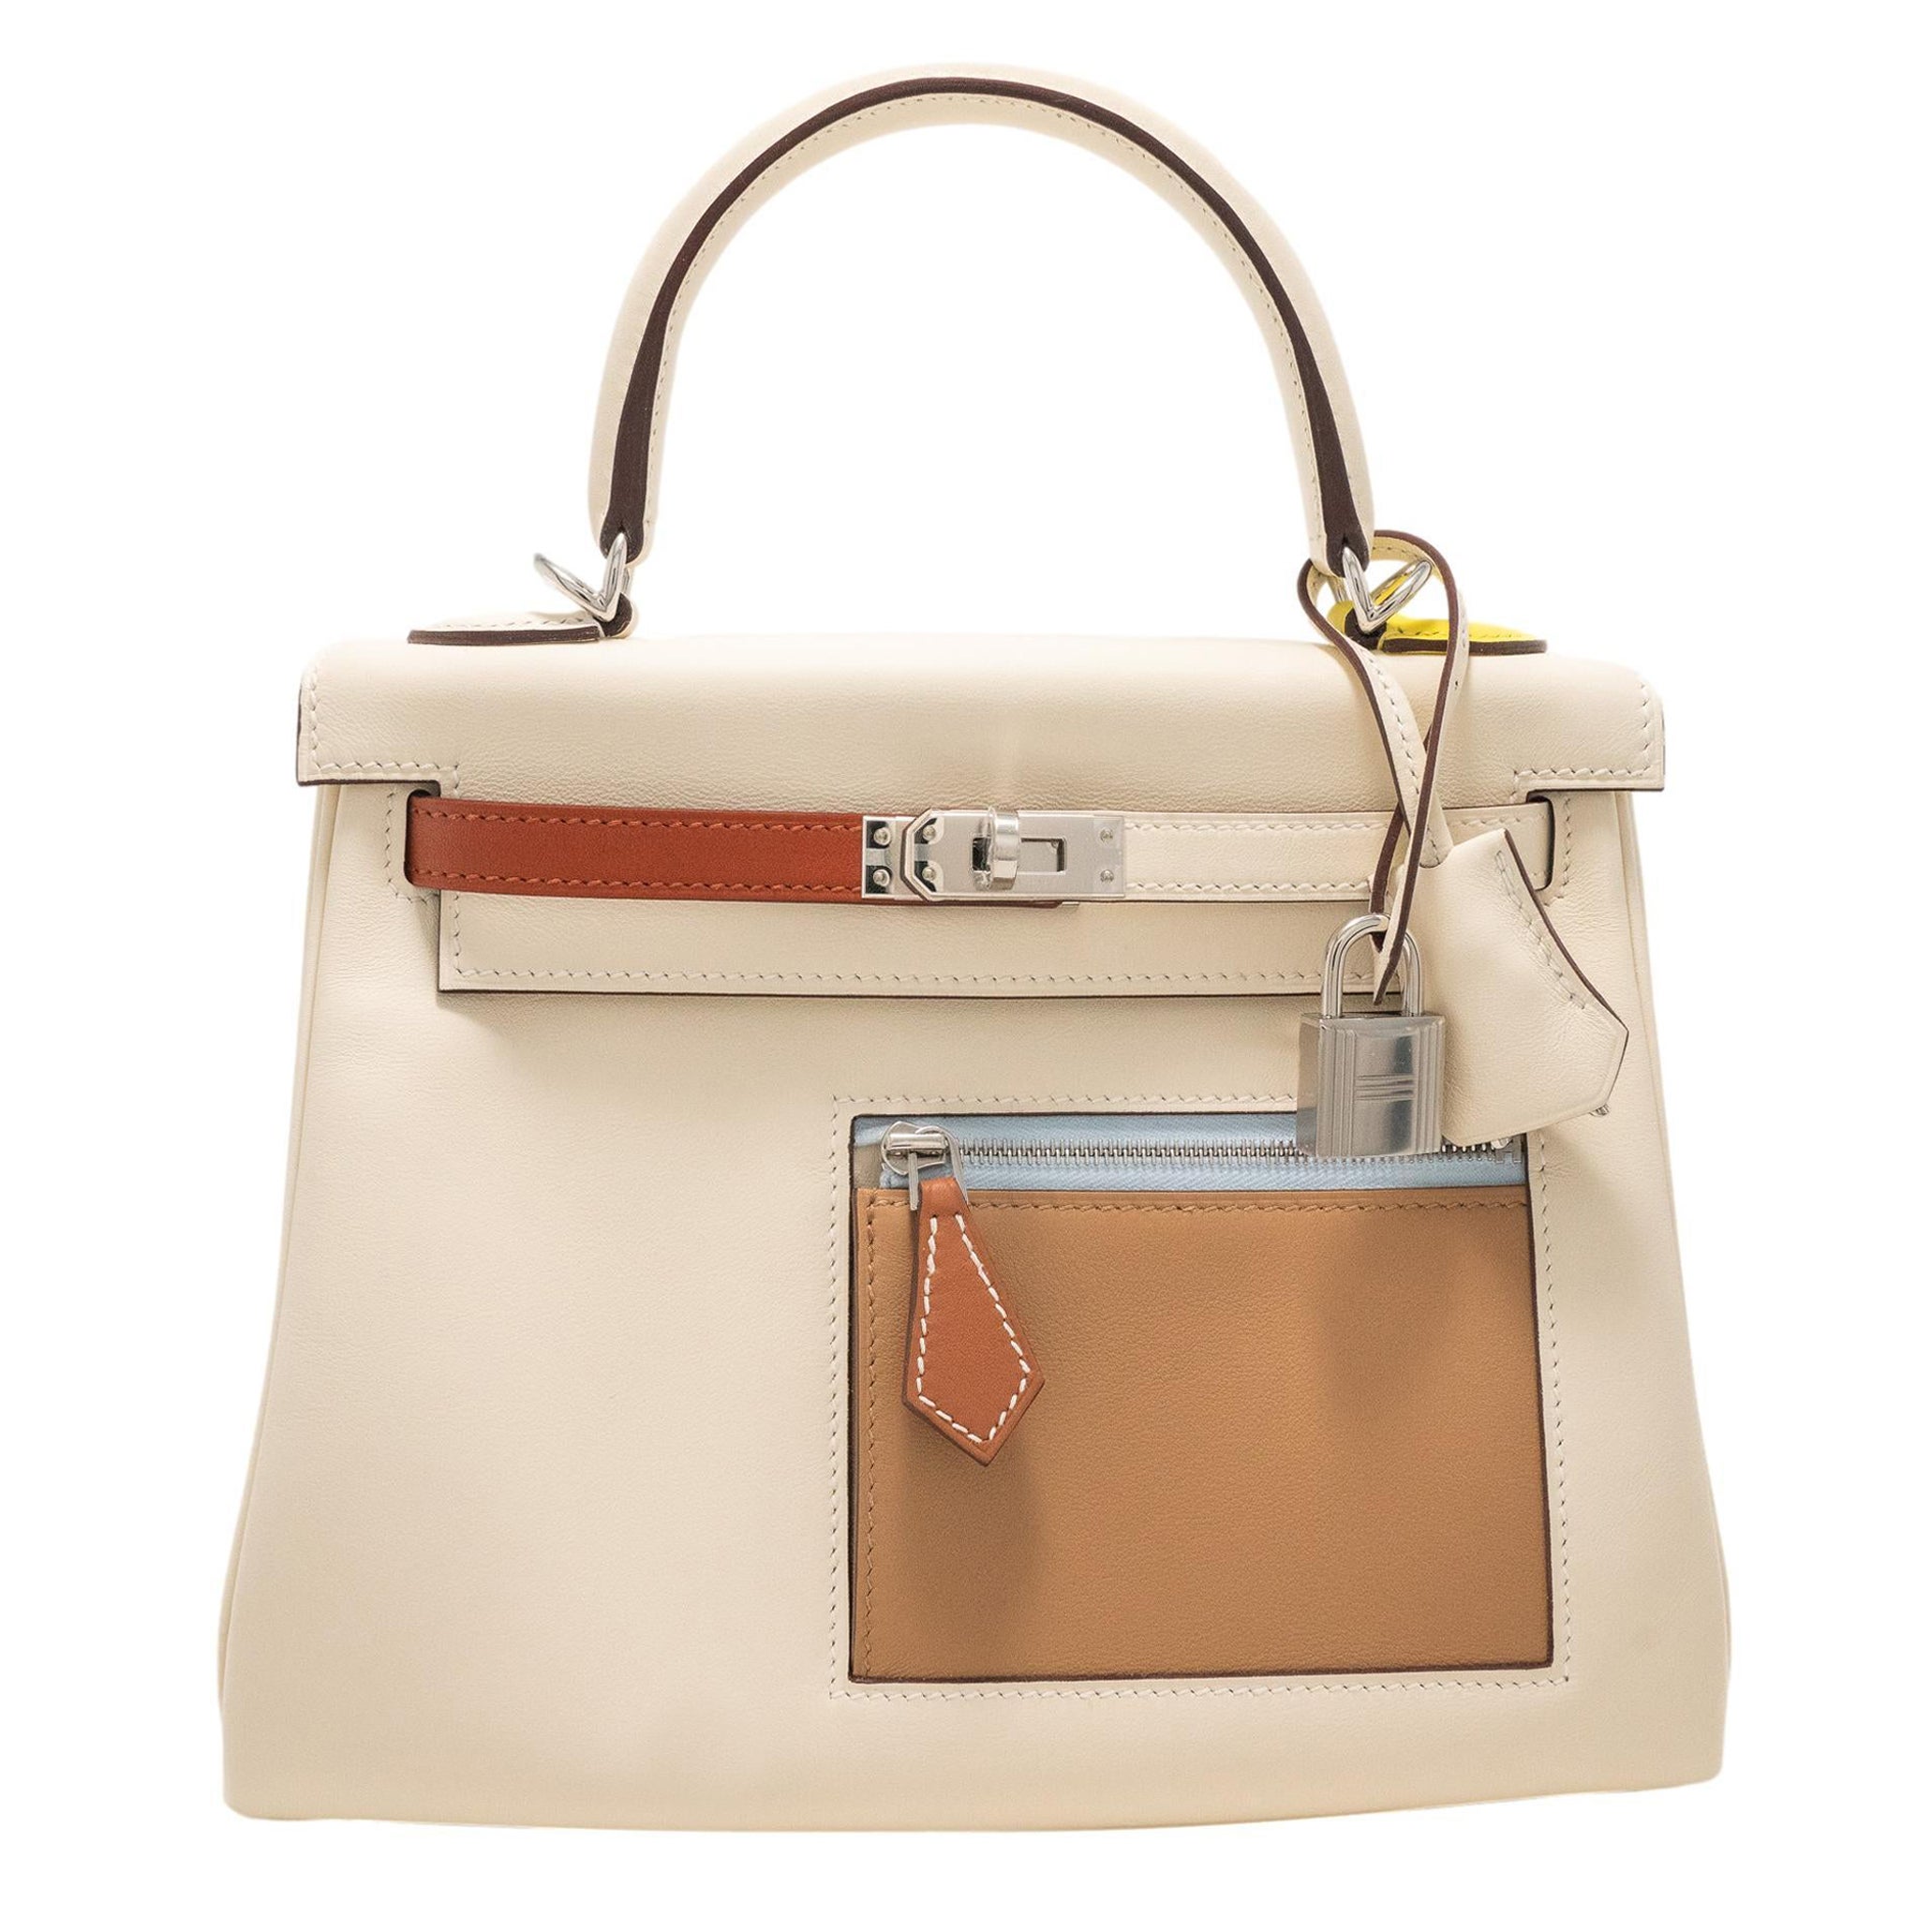 HERMES Kelly 25 Retourne Colormatic "Nata" Swift Leather PHW Limited Edition  For Sale